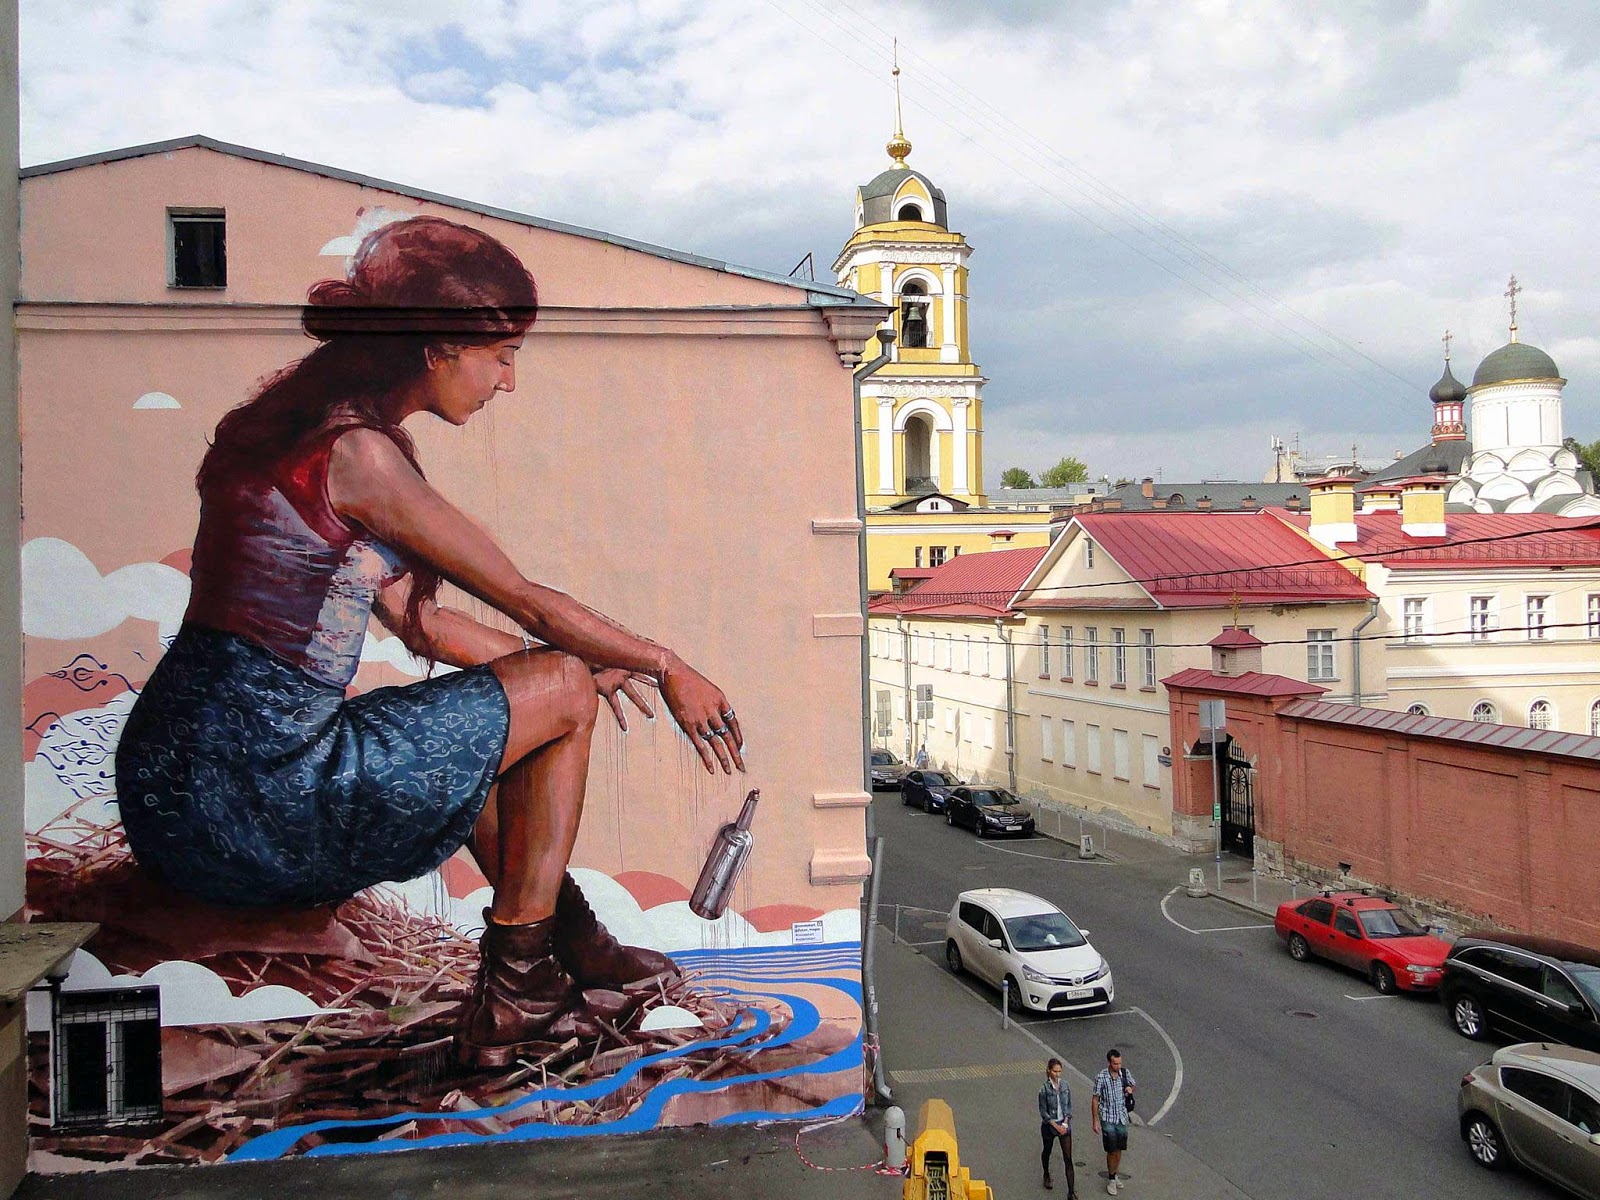 Last seen in Aalborg, Denmark, Fintan Magee has now landed in good old Russia where he painted a new piece on the streets of Moscow.